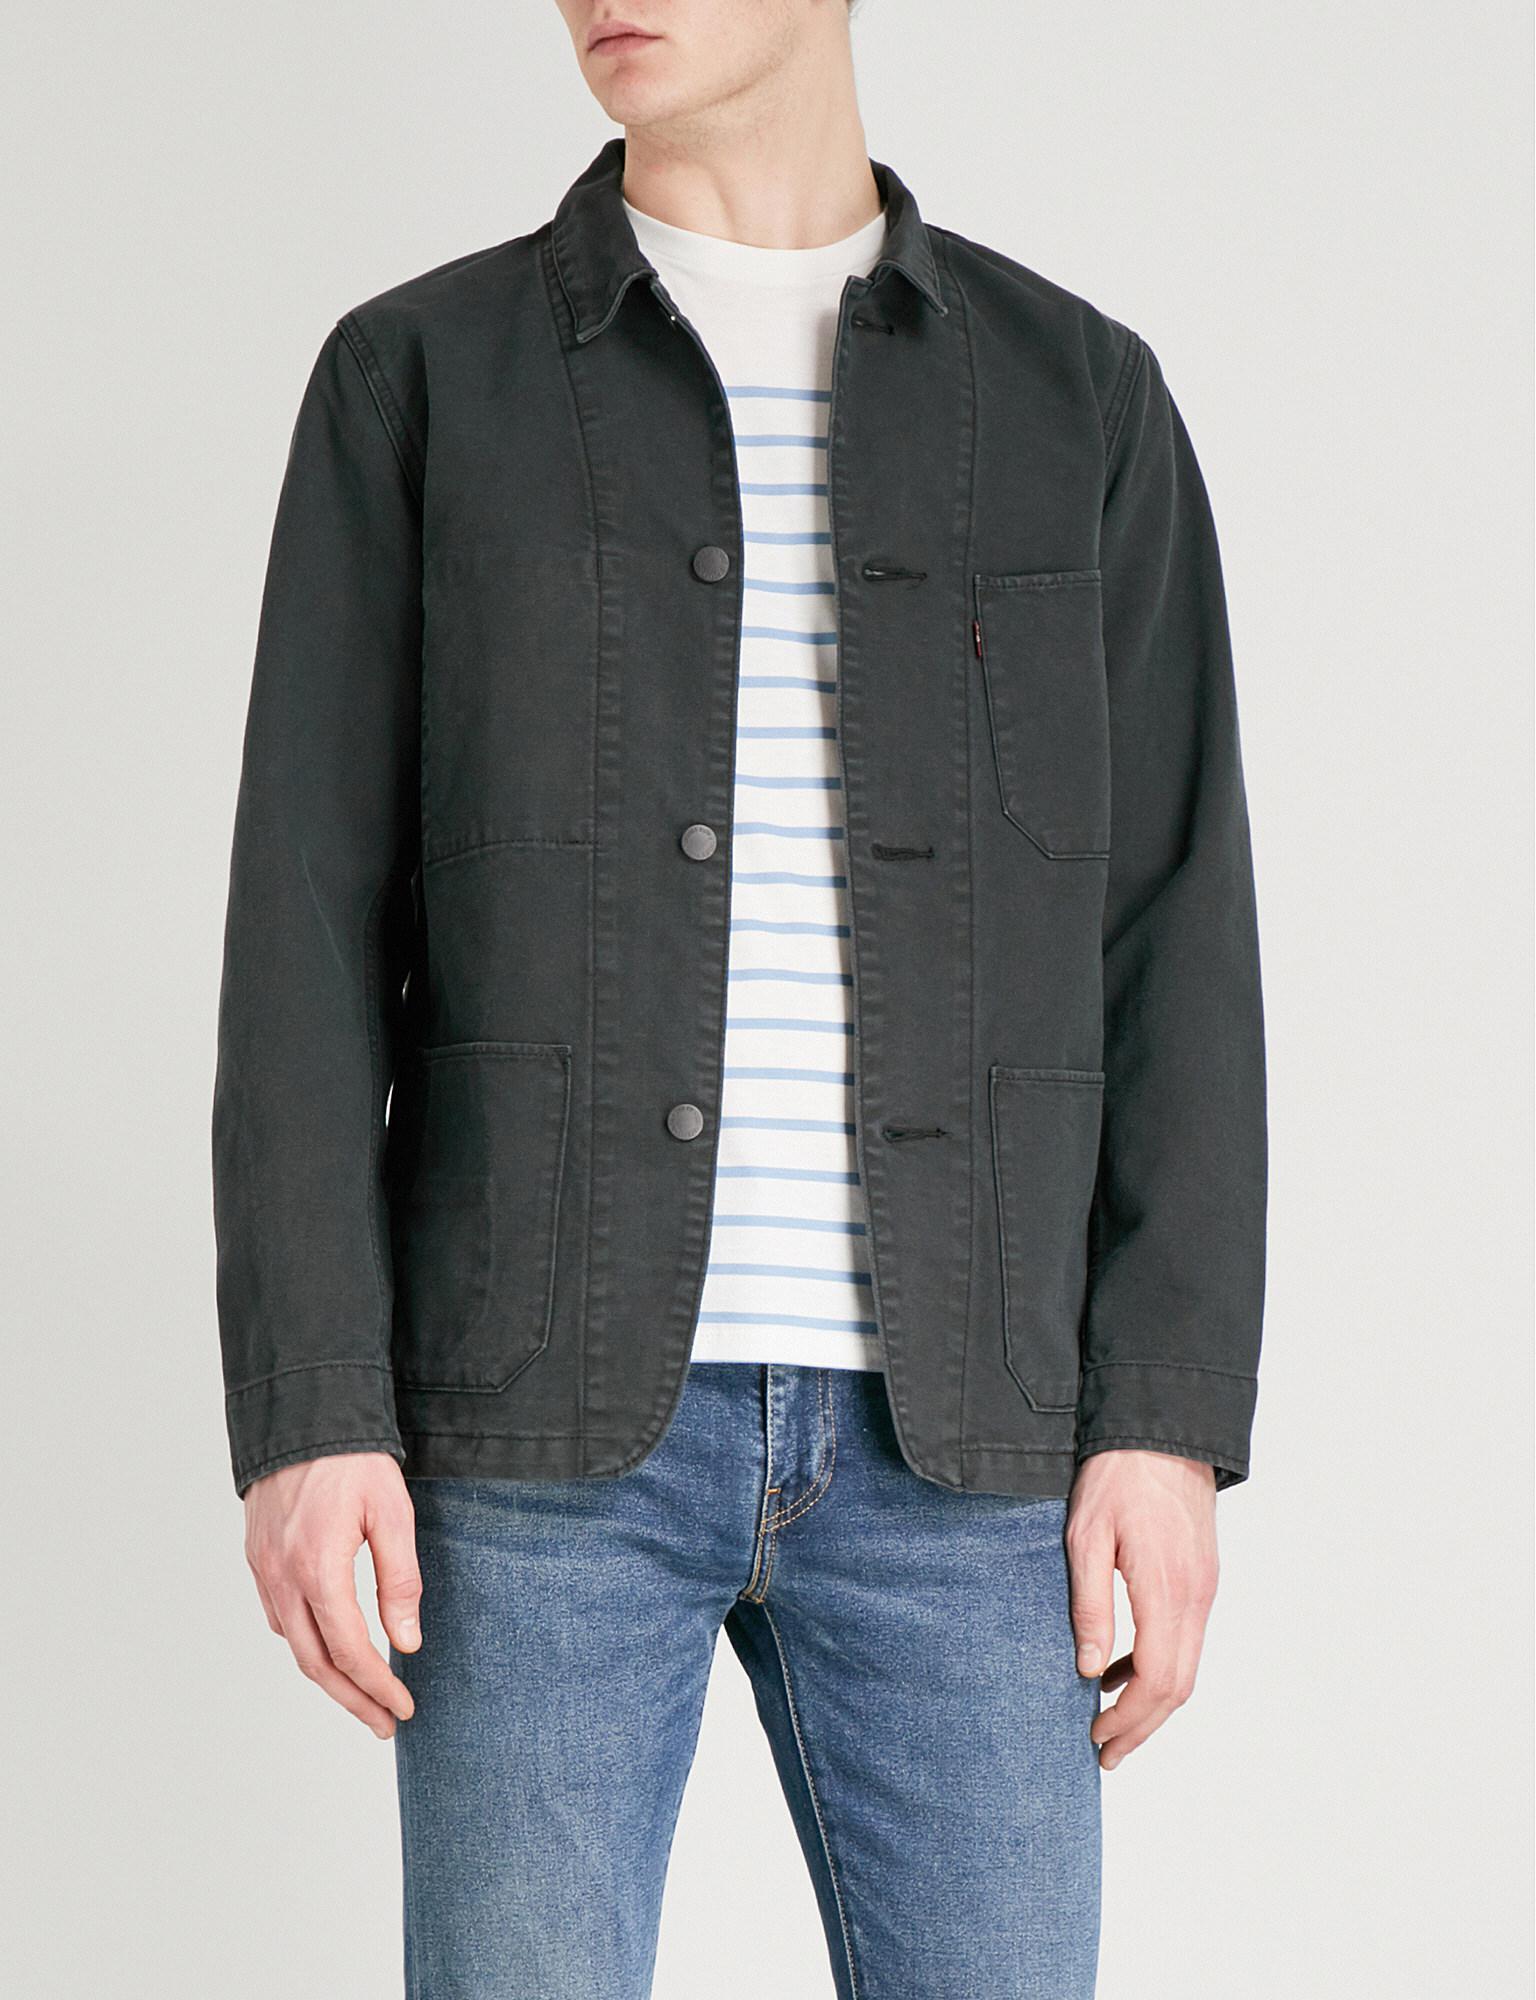 Levis Engineer Jacket Black Hotsell, 56% OFF | a4accounting.com.au